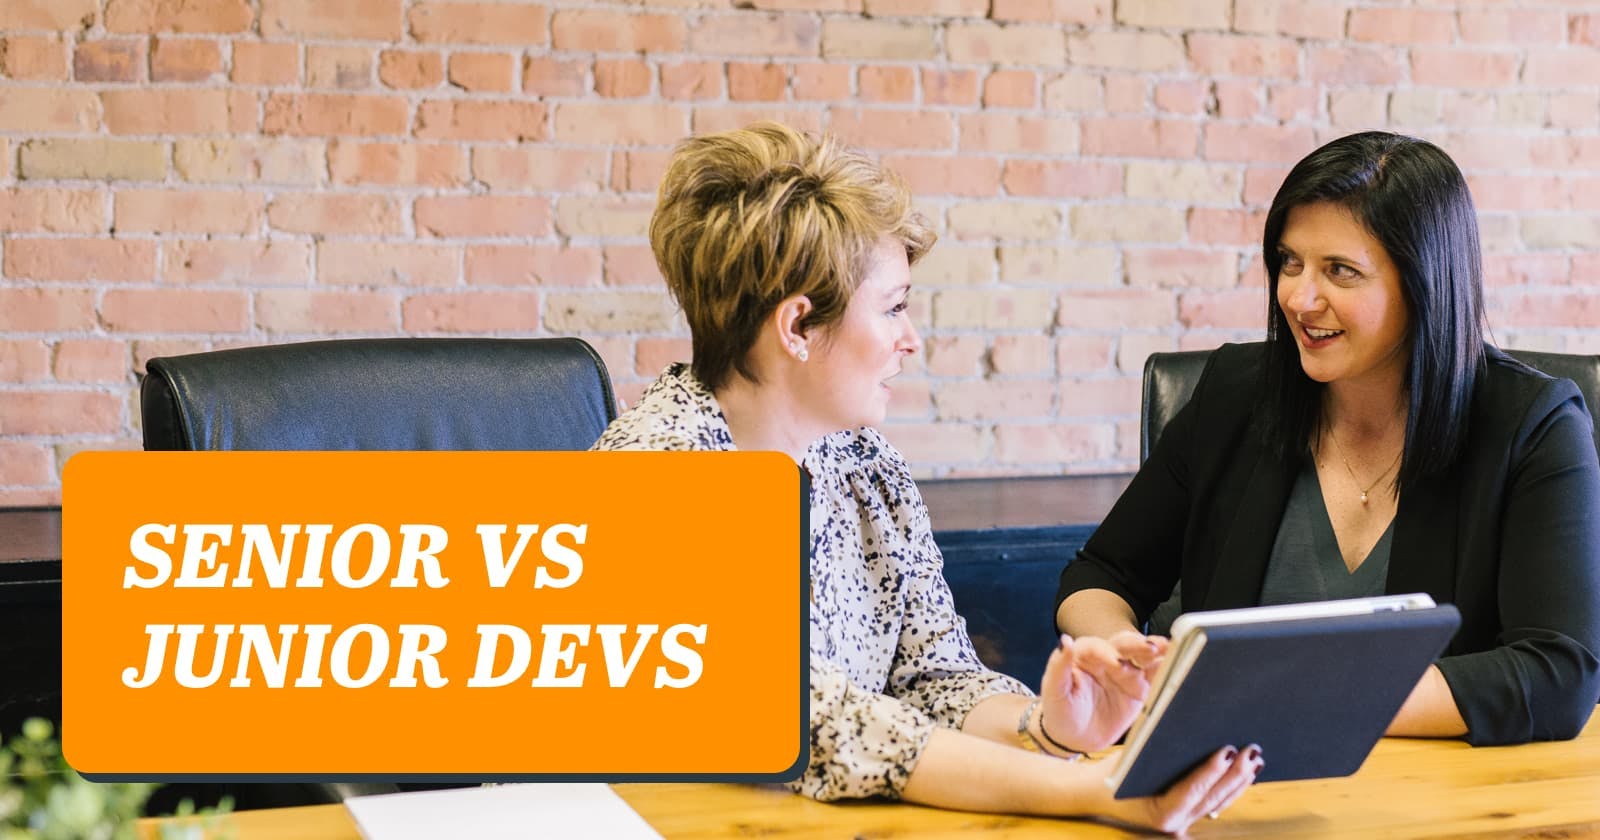 What is the difference between Senior and Junior developers?